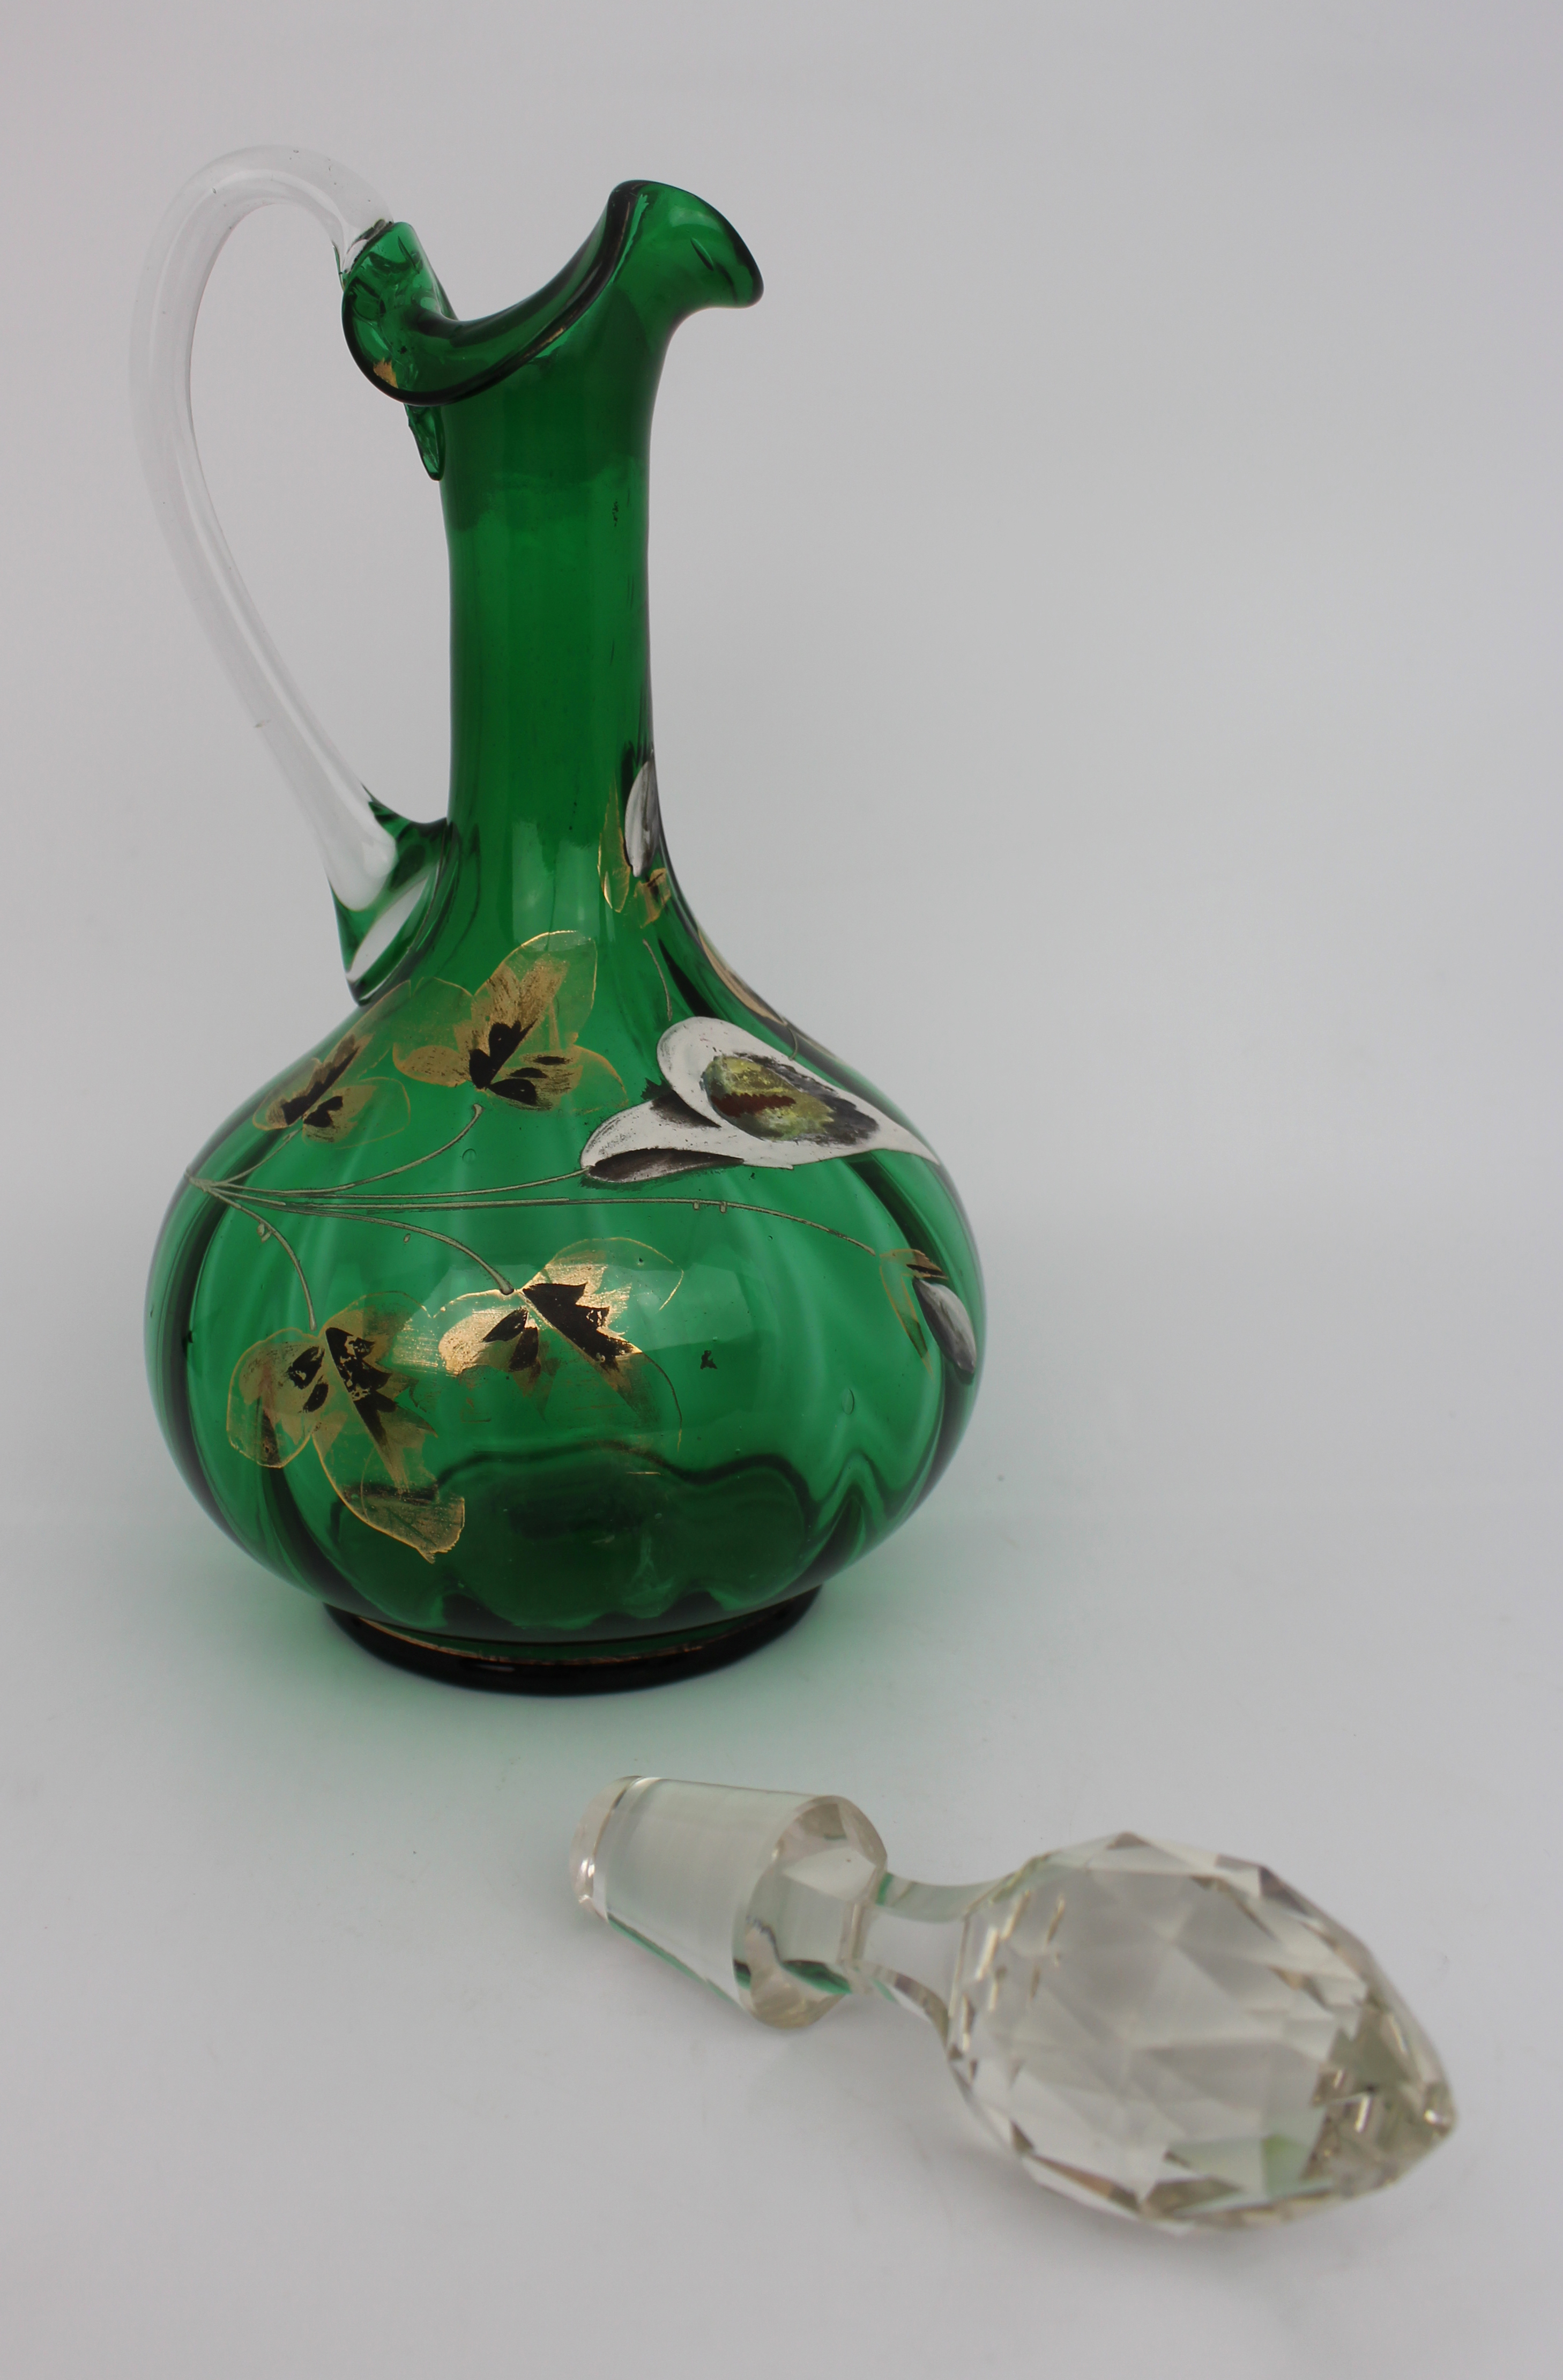 Antique Hand Painted Green Glass Claret Jug - Image 5 of 6